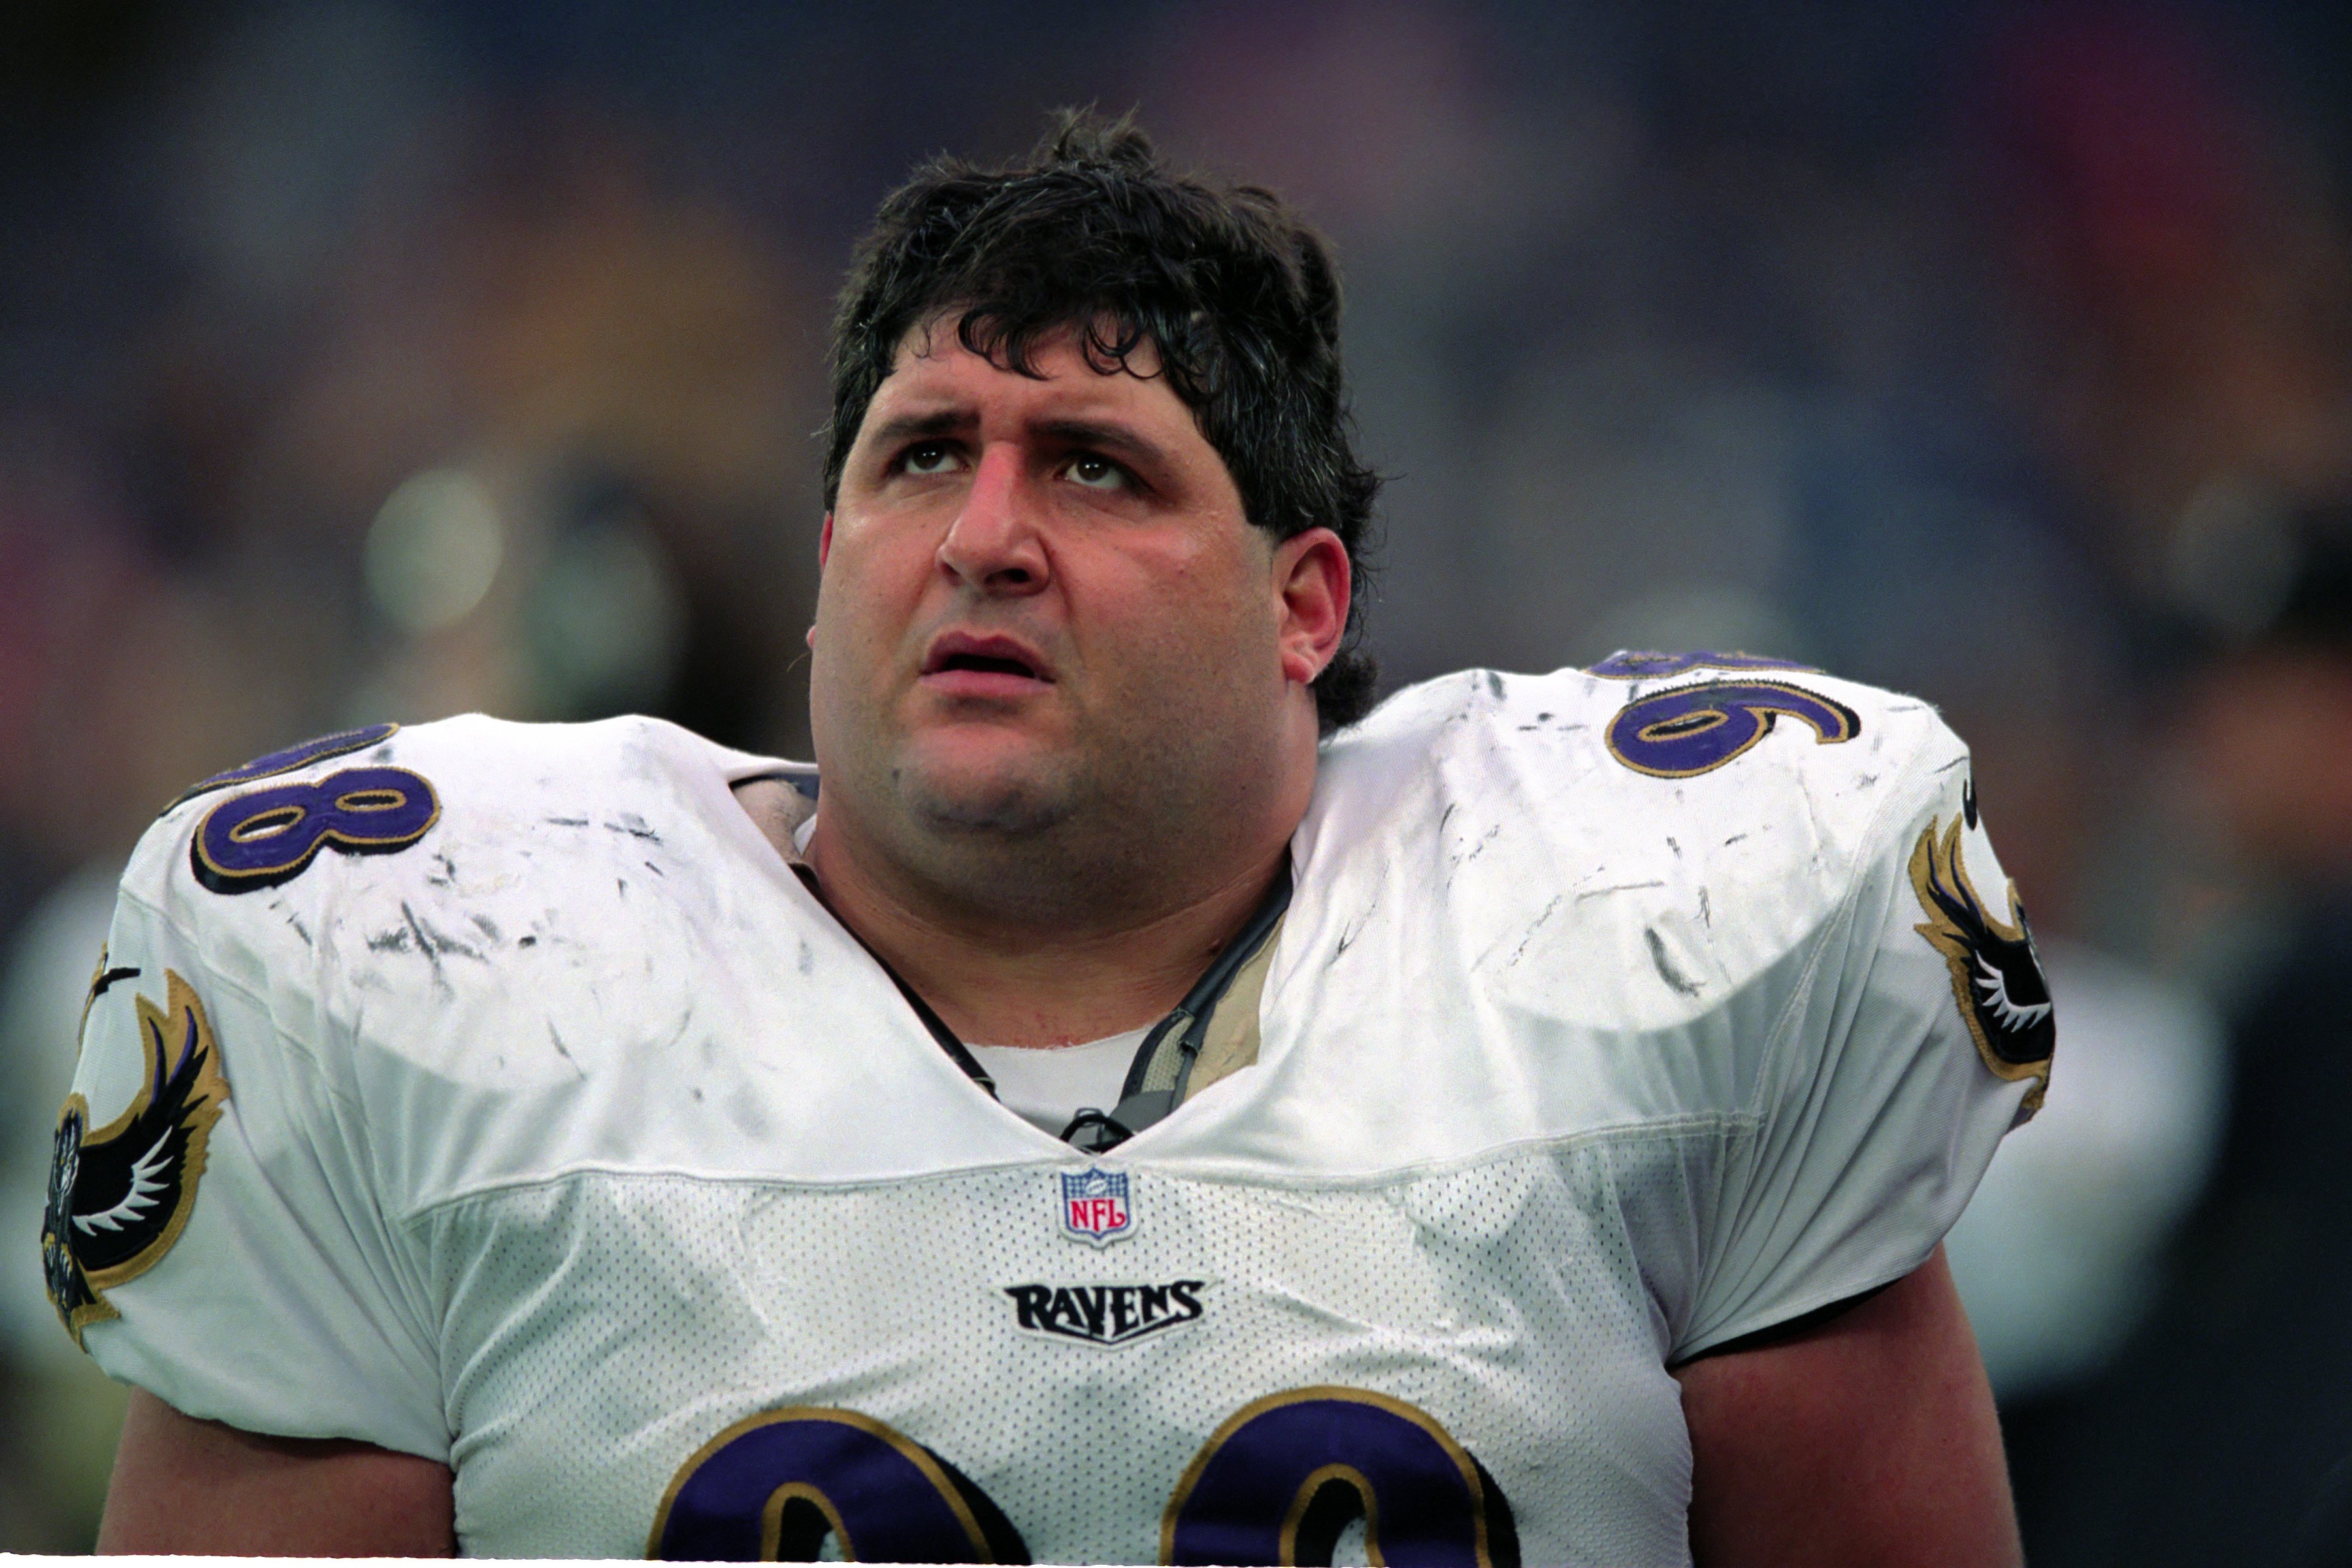 Tony Siragusa of the Baltimore Ravens looks on from the sideline during a game against the Pittsburgh Steelers at Three Rivers Stadium on December 12, 1999, in Pittsburgh, Pennsylvania. | Source: Getty Images